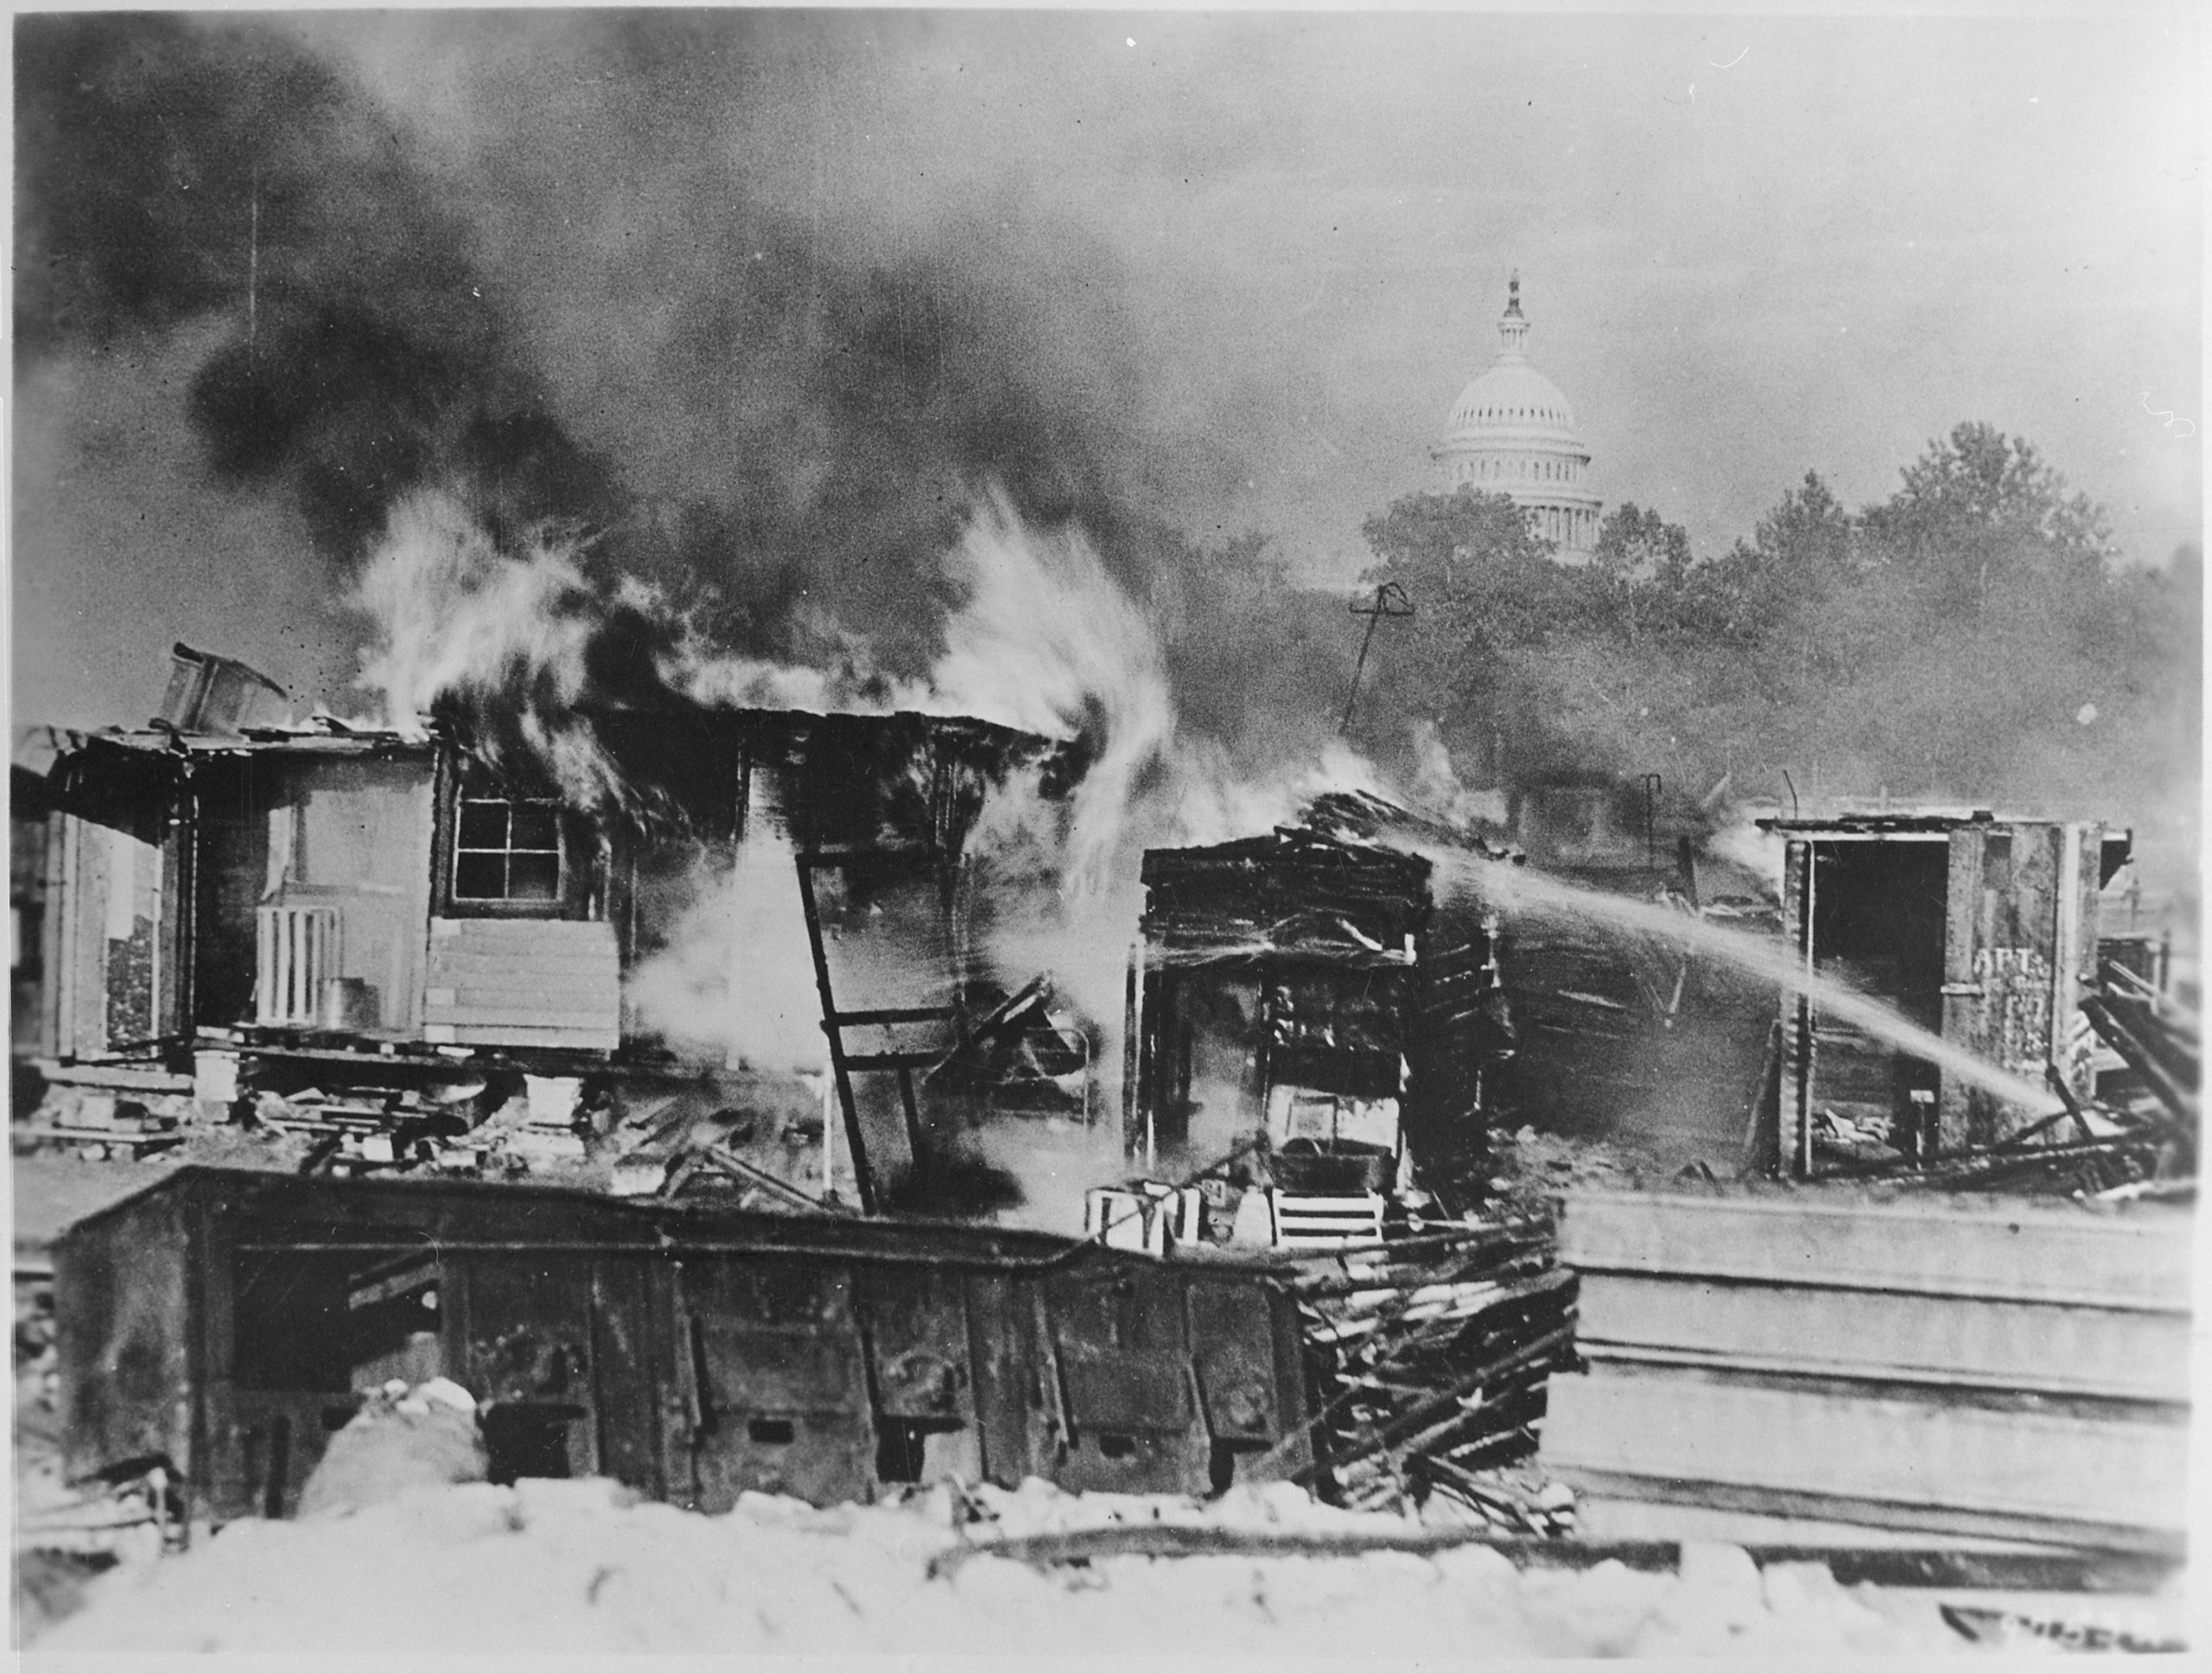 Bonus Army camps went up in flames after the U.S. Army evicted protesters on the night of July 28, 1932. The dome of the Capitol Building is visible in the distance. (National Archives)